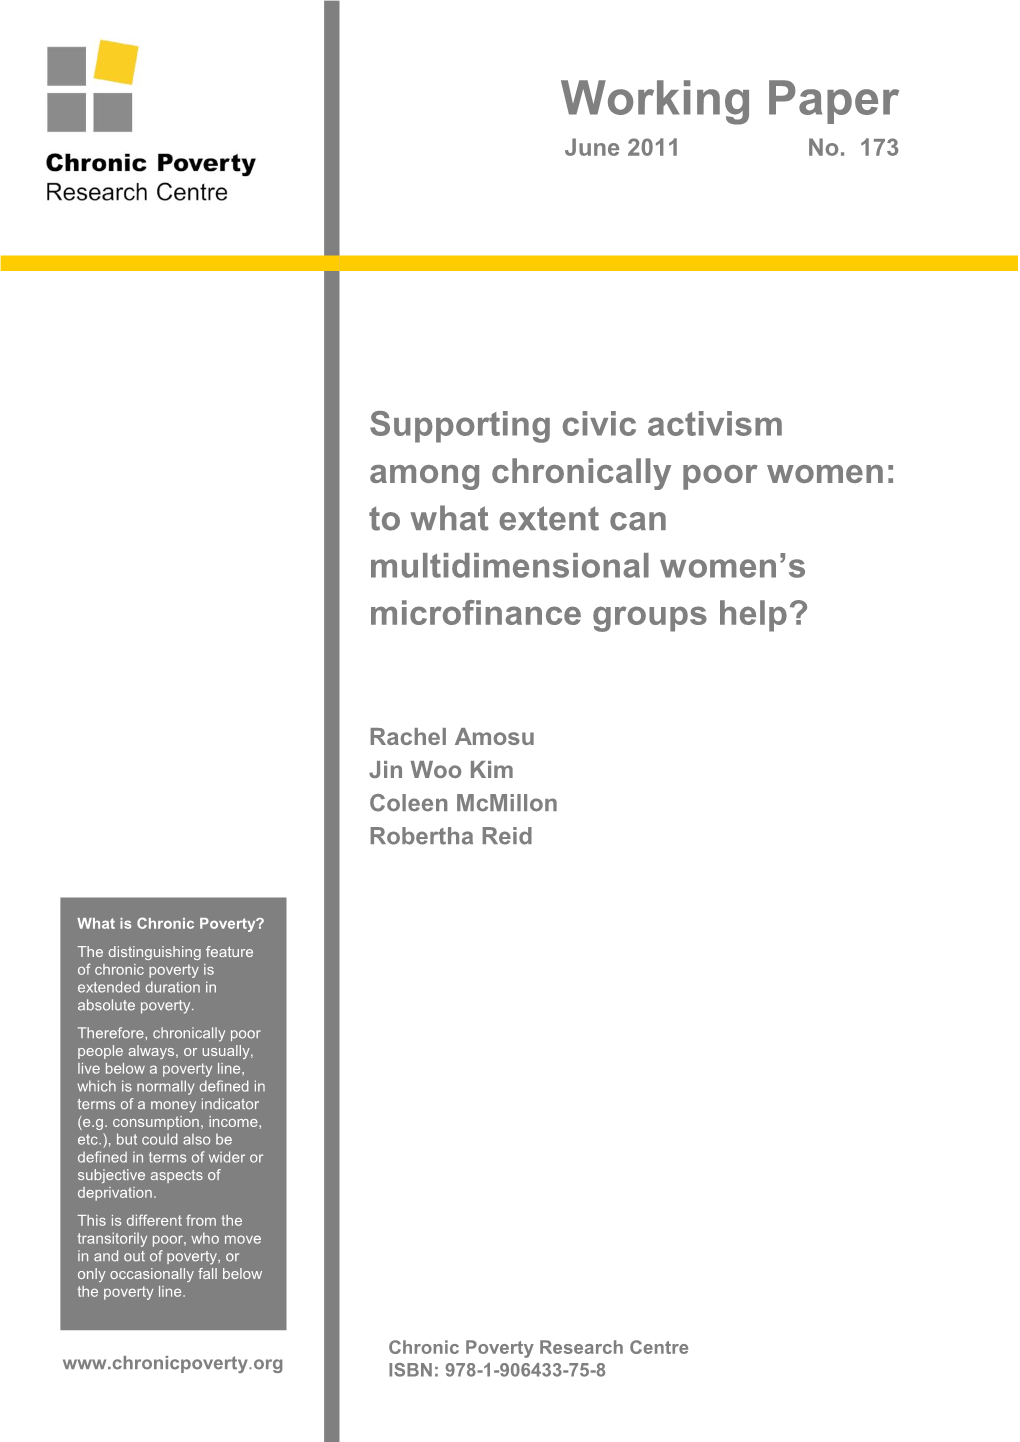 Supporting Civic Activism Among Chronically Poor Women: to What Extent Can Multidimensional Women’S Microfinance Groups Help?